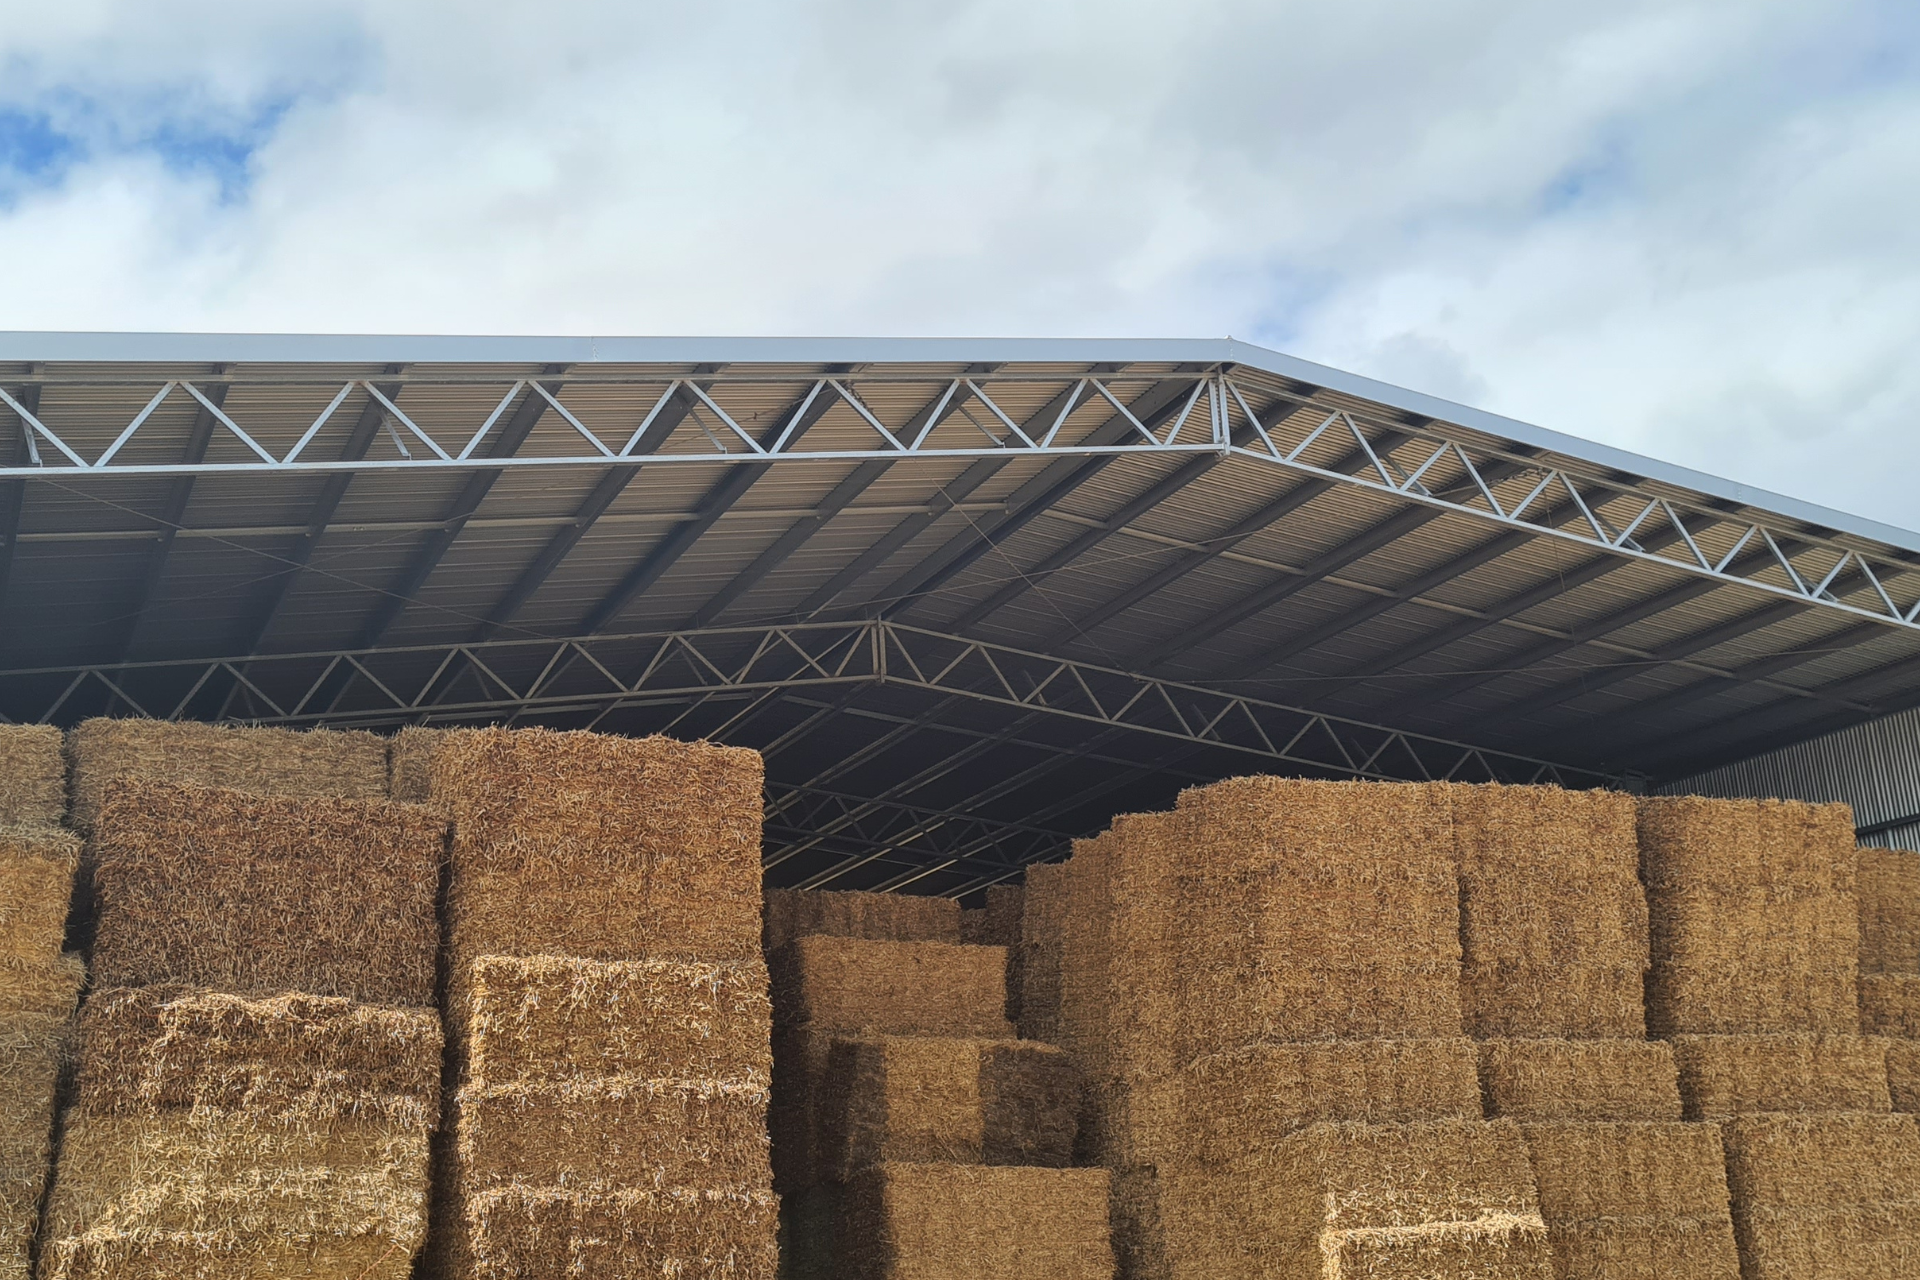 The Best Roof Pitch For Farm Sheds